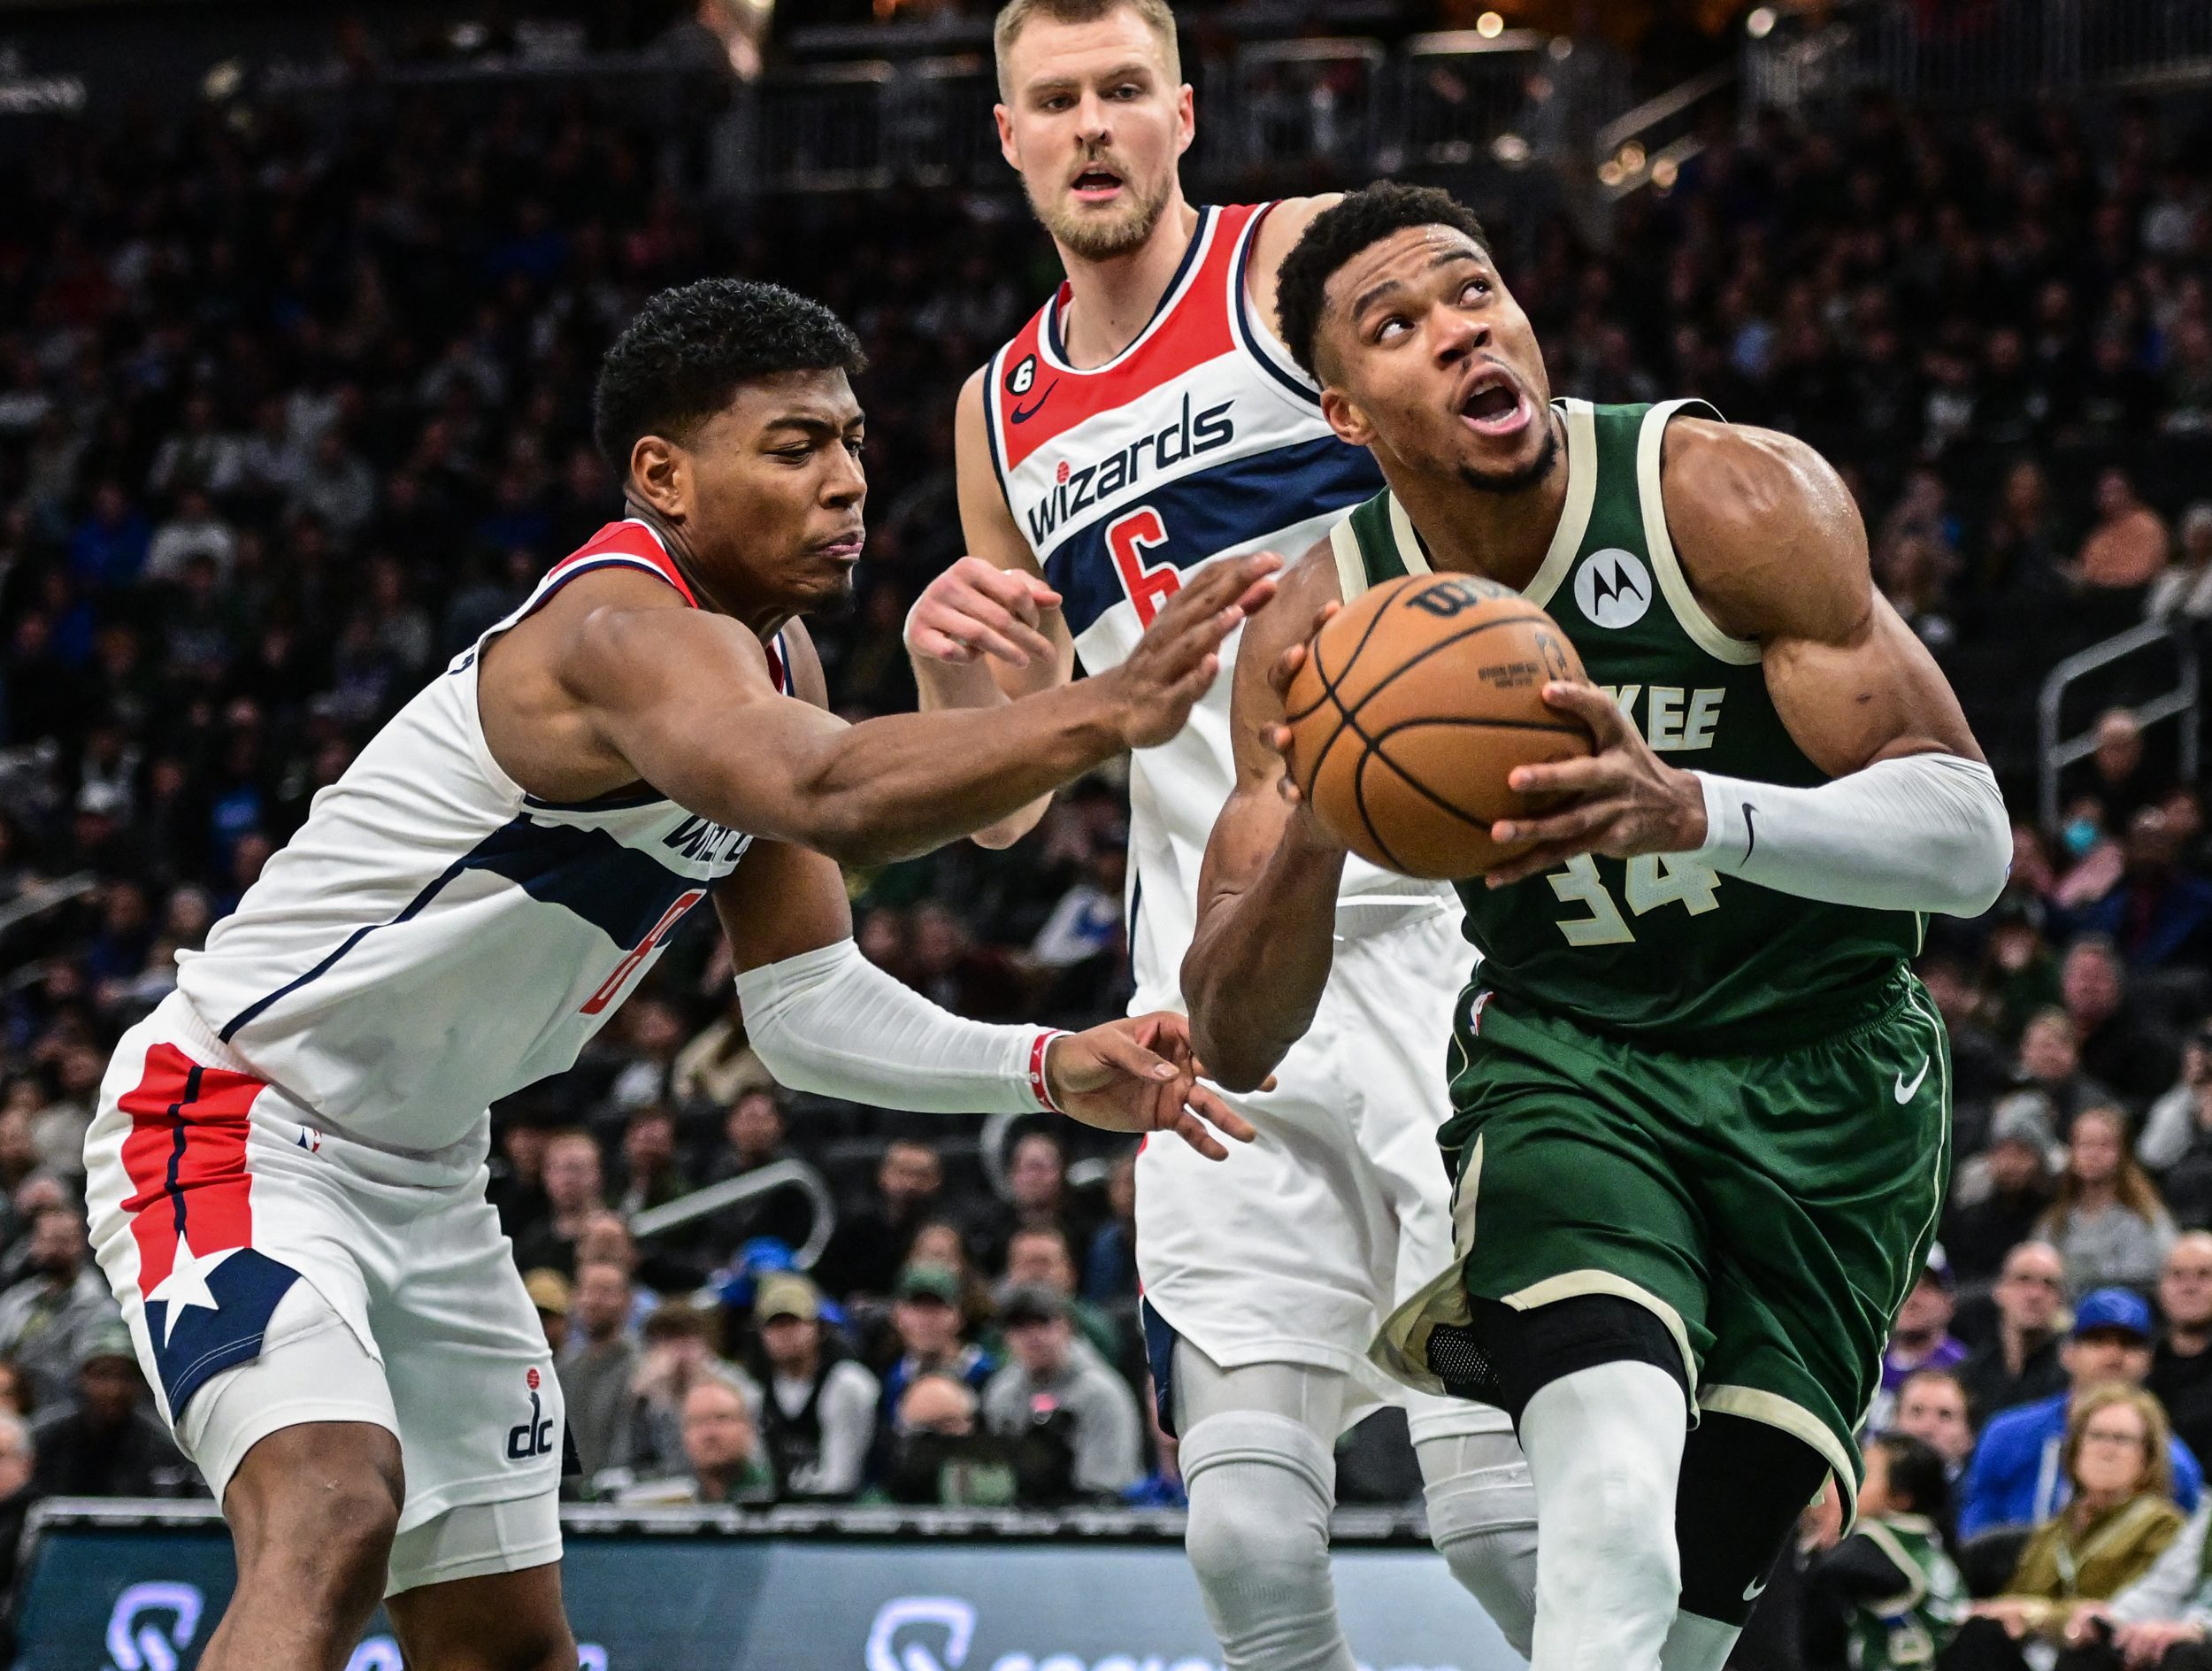 Antetokounmpo erupts for career-high 55, leads Bucks past Wizards